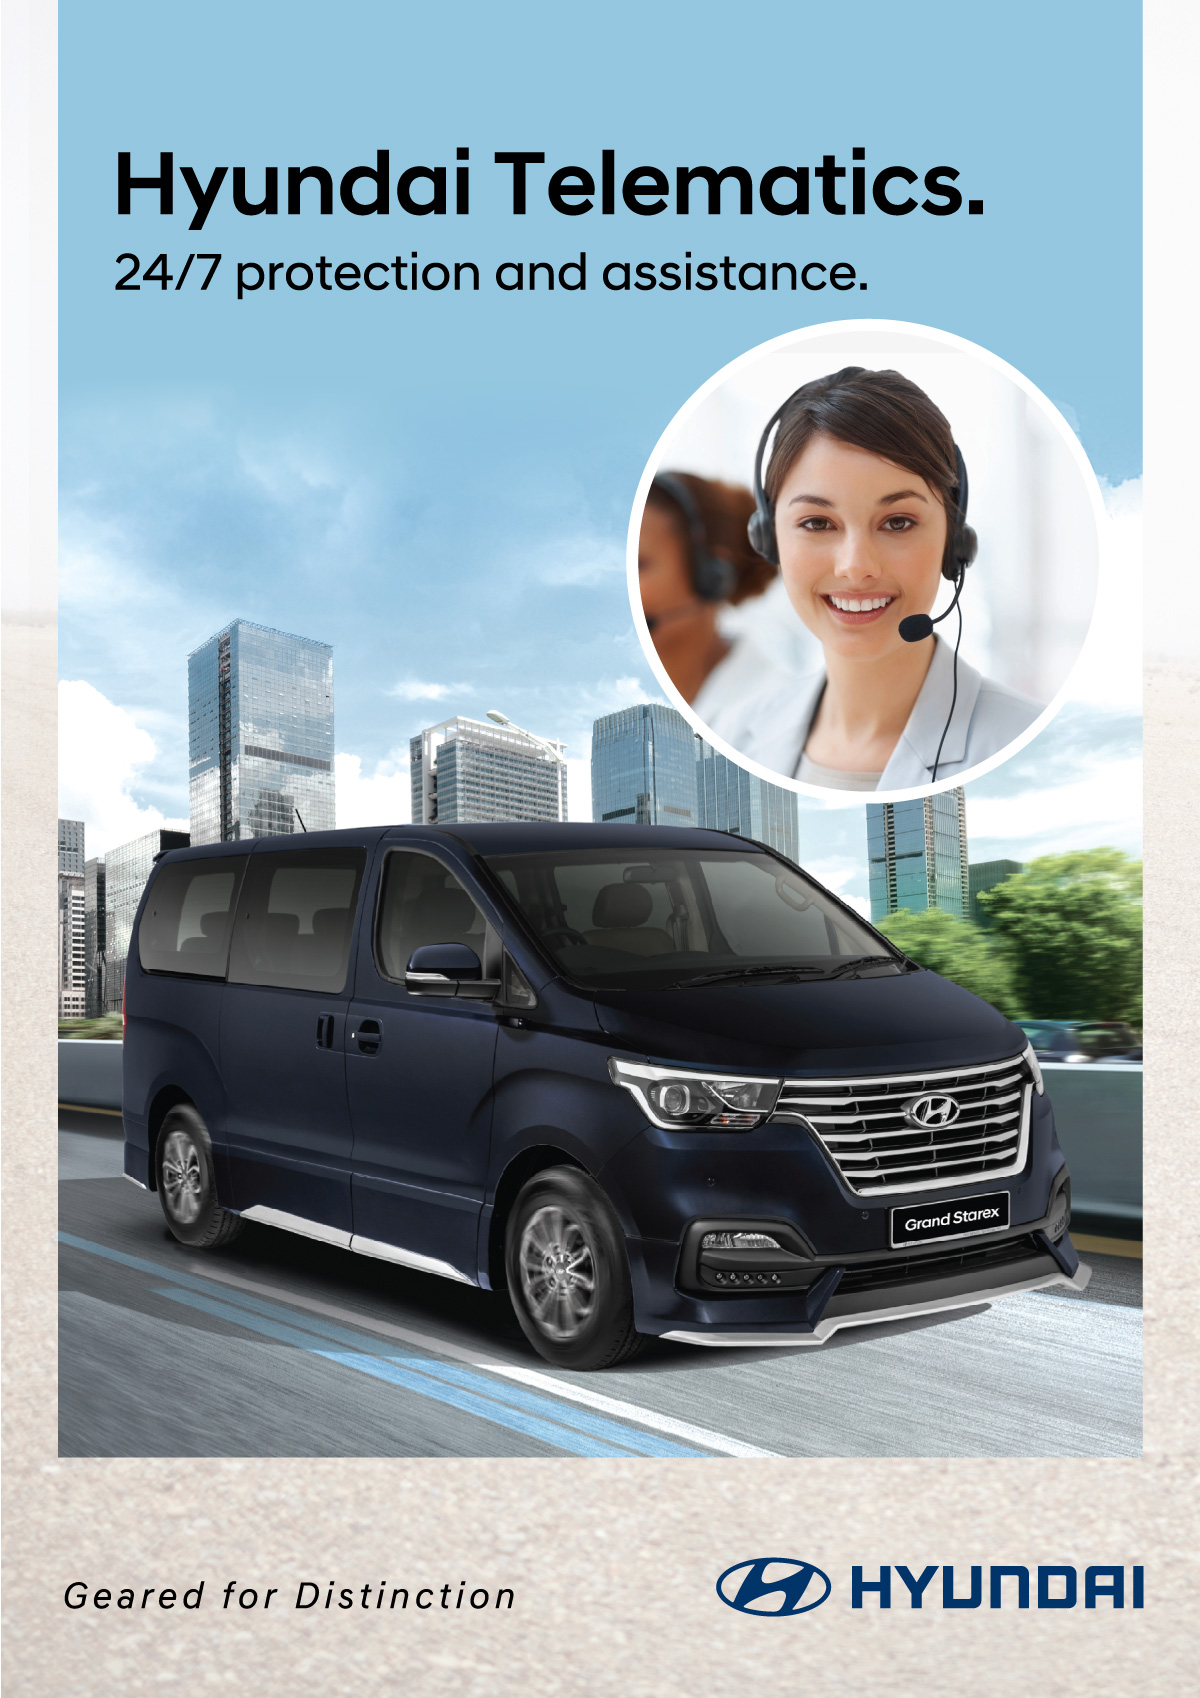 01 - Hyundai Telematics - 24/7 protection and assistance. eCall - automatic Accident Detection | Manual eCall : Emergency Assistance | bCall : Breakdown Assistance. | Service Assist | Mobile App - Connected Security Features | Stolen Vehicle Tracking